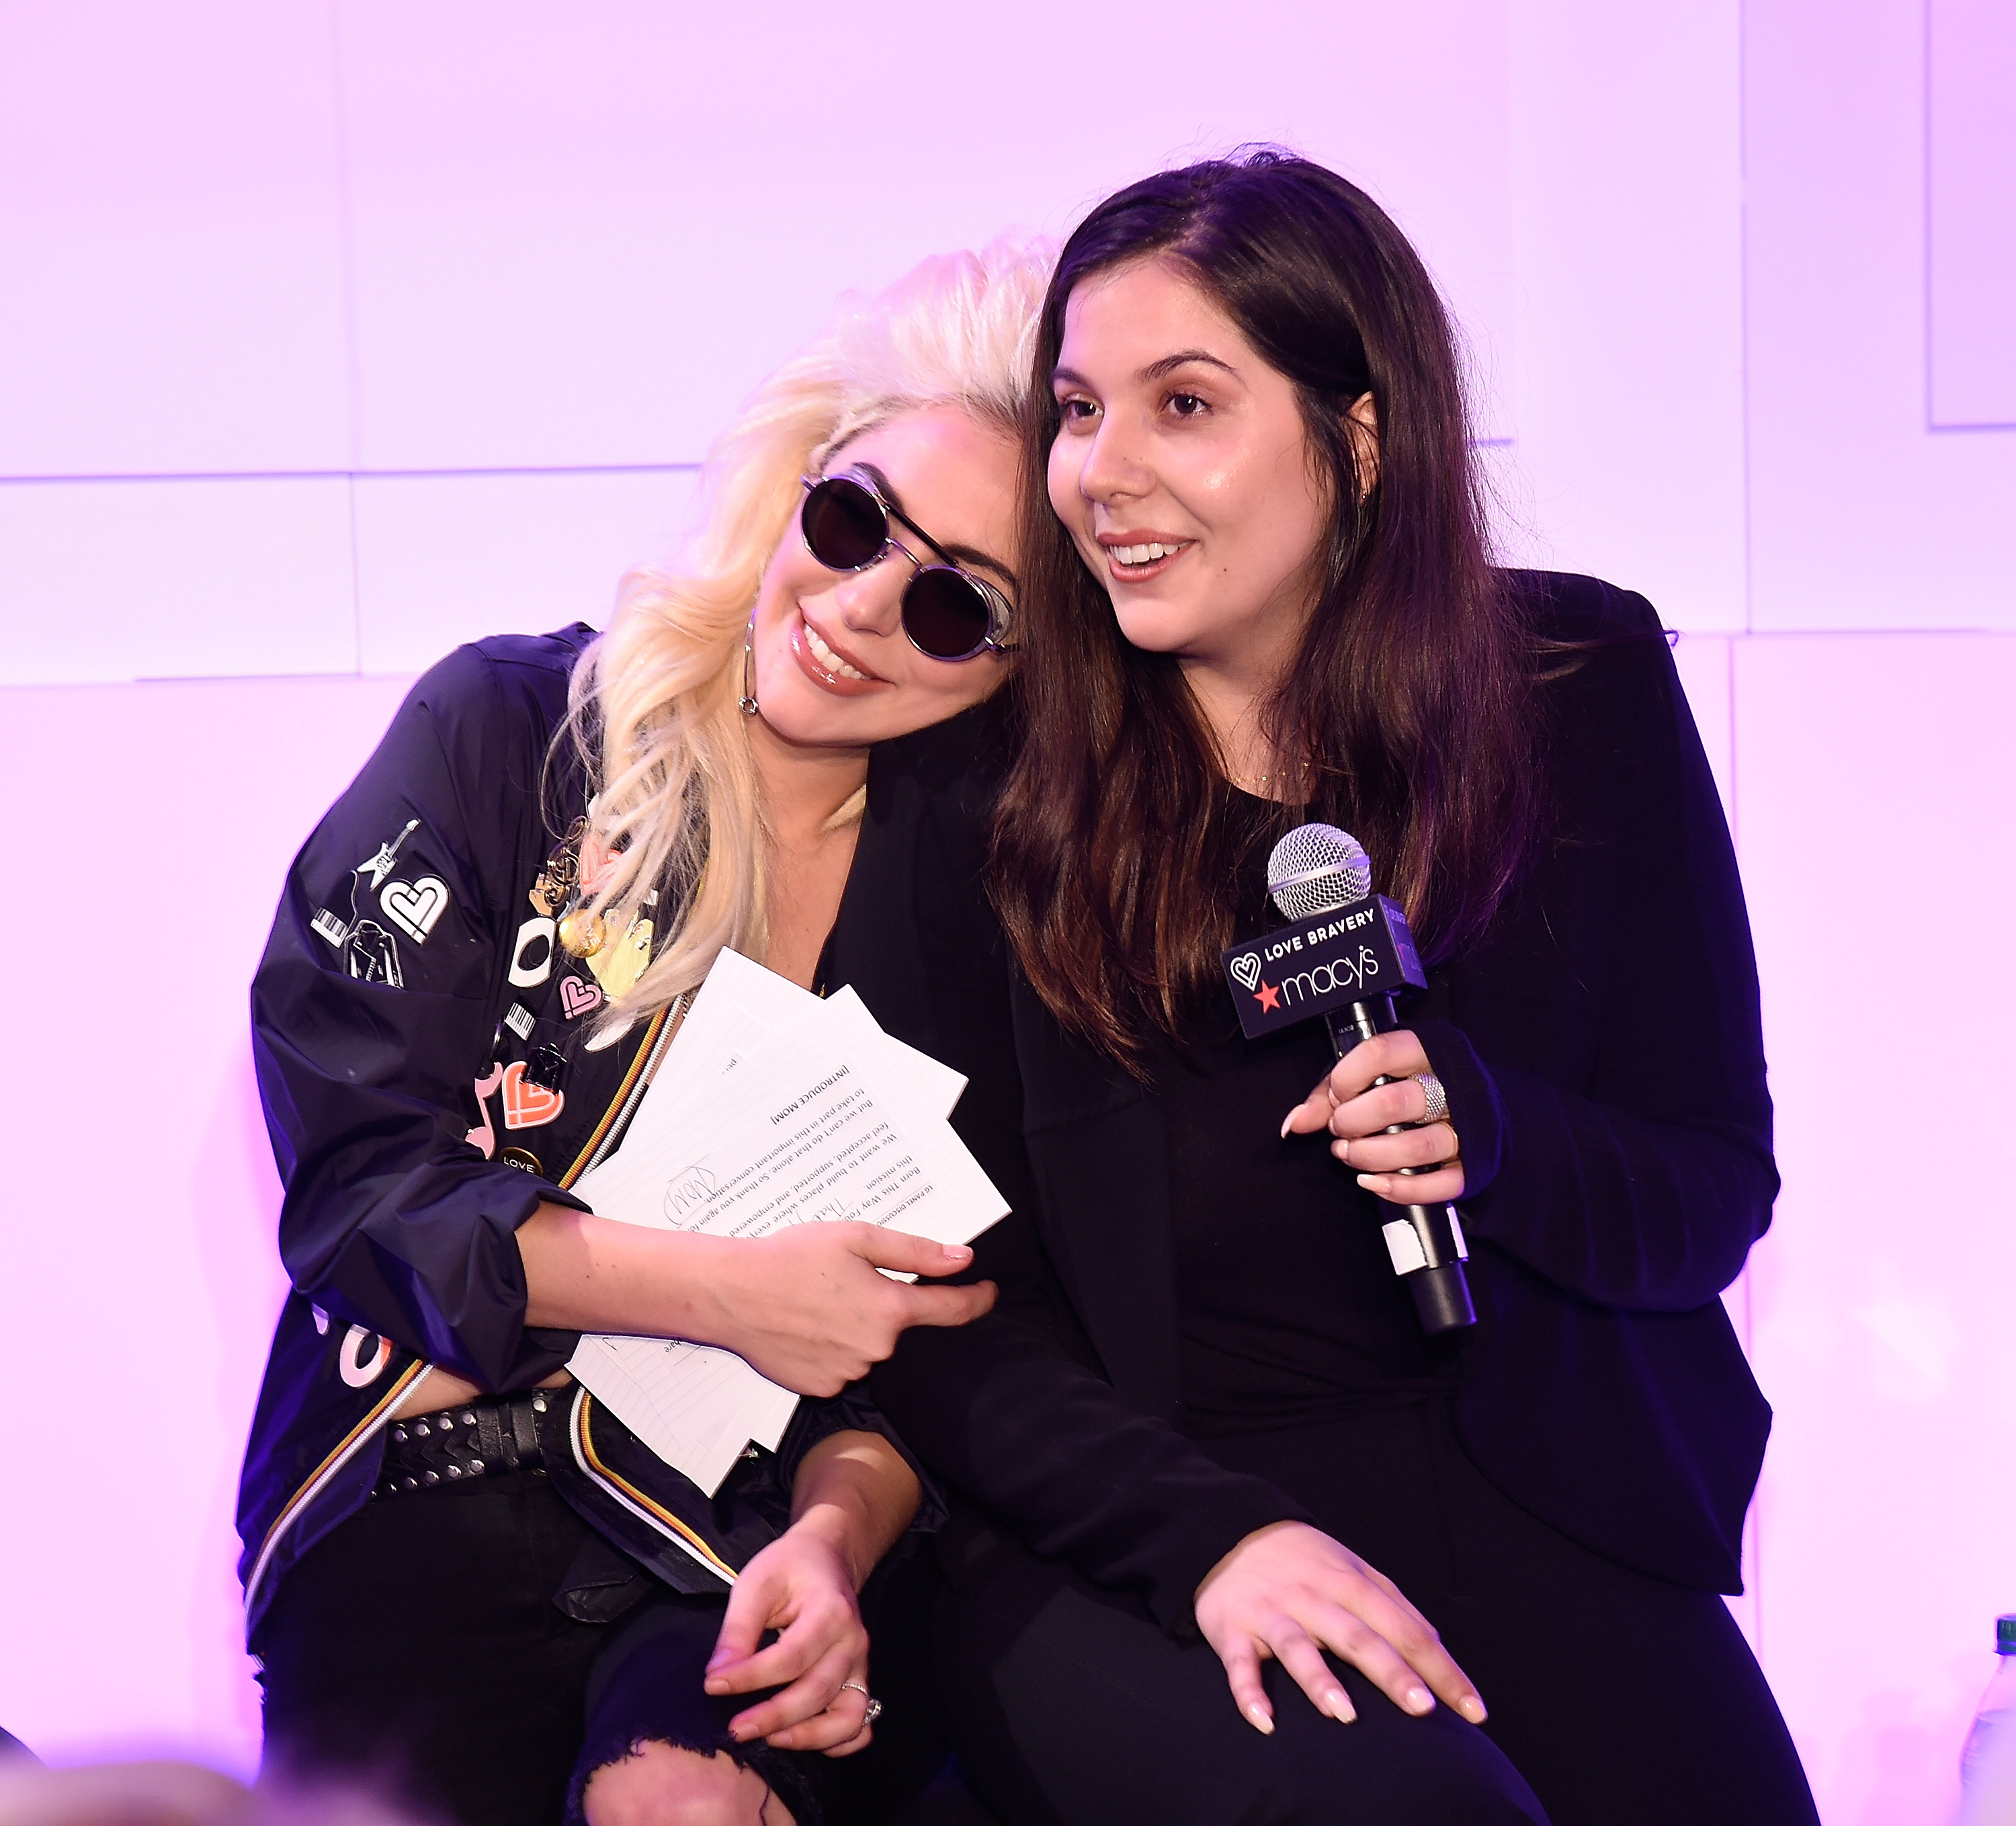 Lady Gaga and Natali Germanotta speak to customers who made a lovebravery qualifying purchase at the launch of "Bravery" by Lady Gaga and Elton John at Macy's Herald Square on May 4, 2016, in New York City | Source: Getty Images